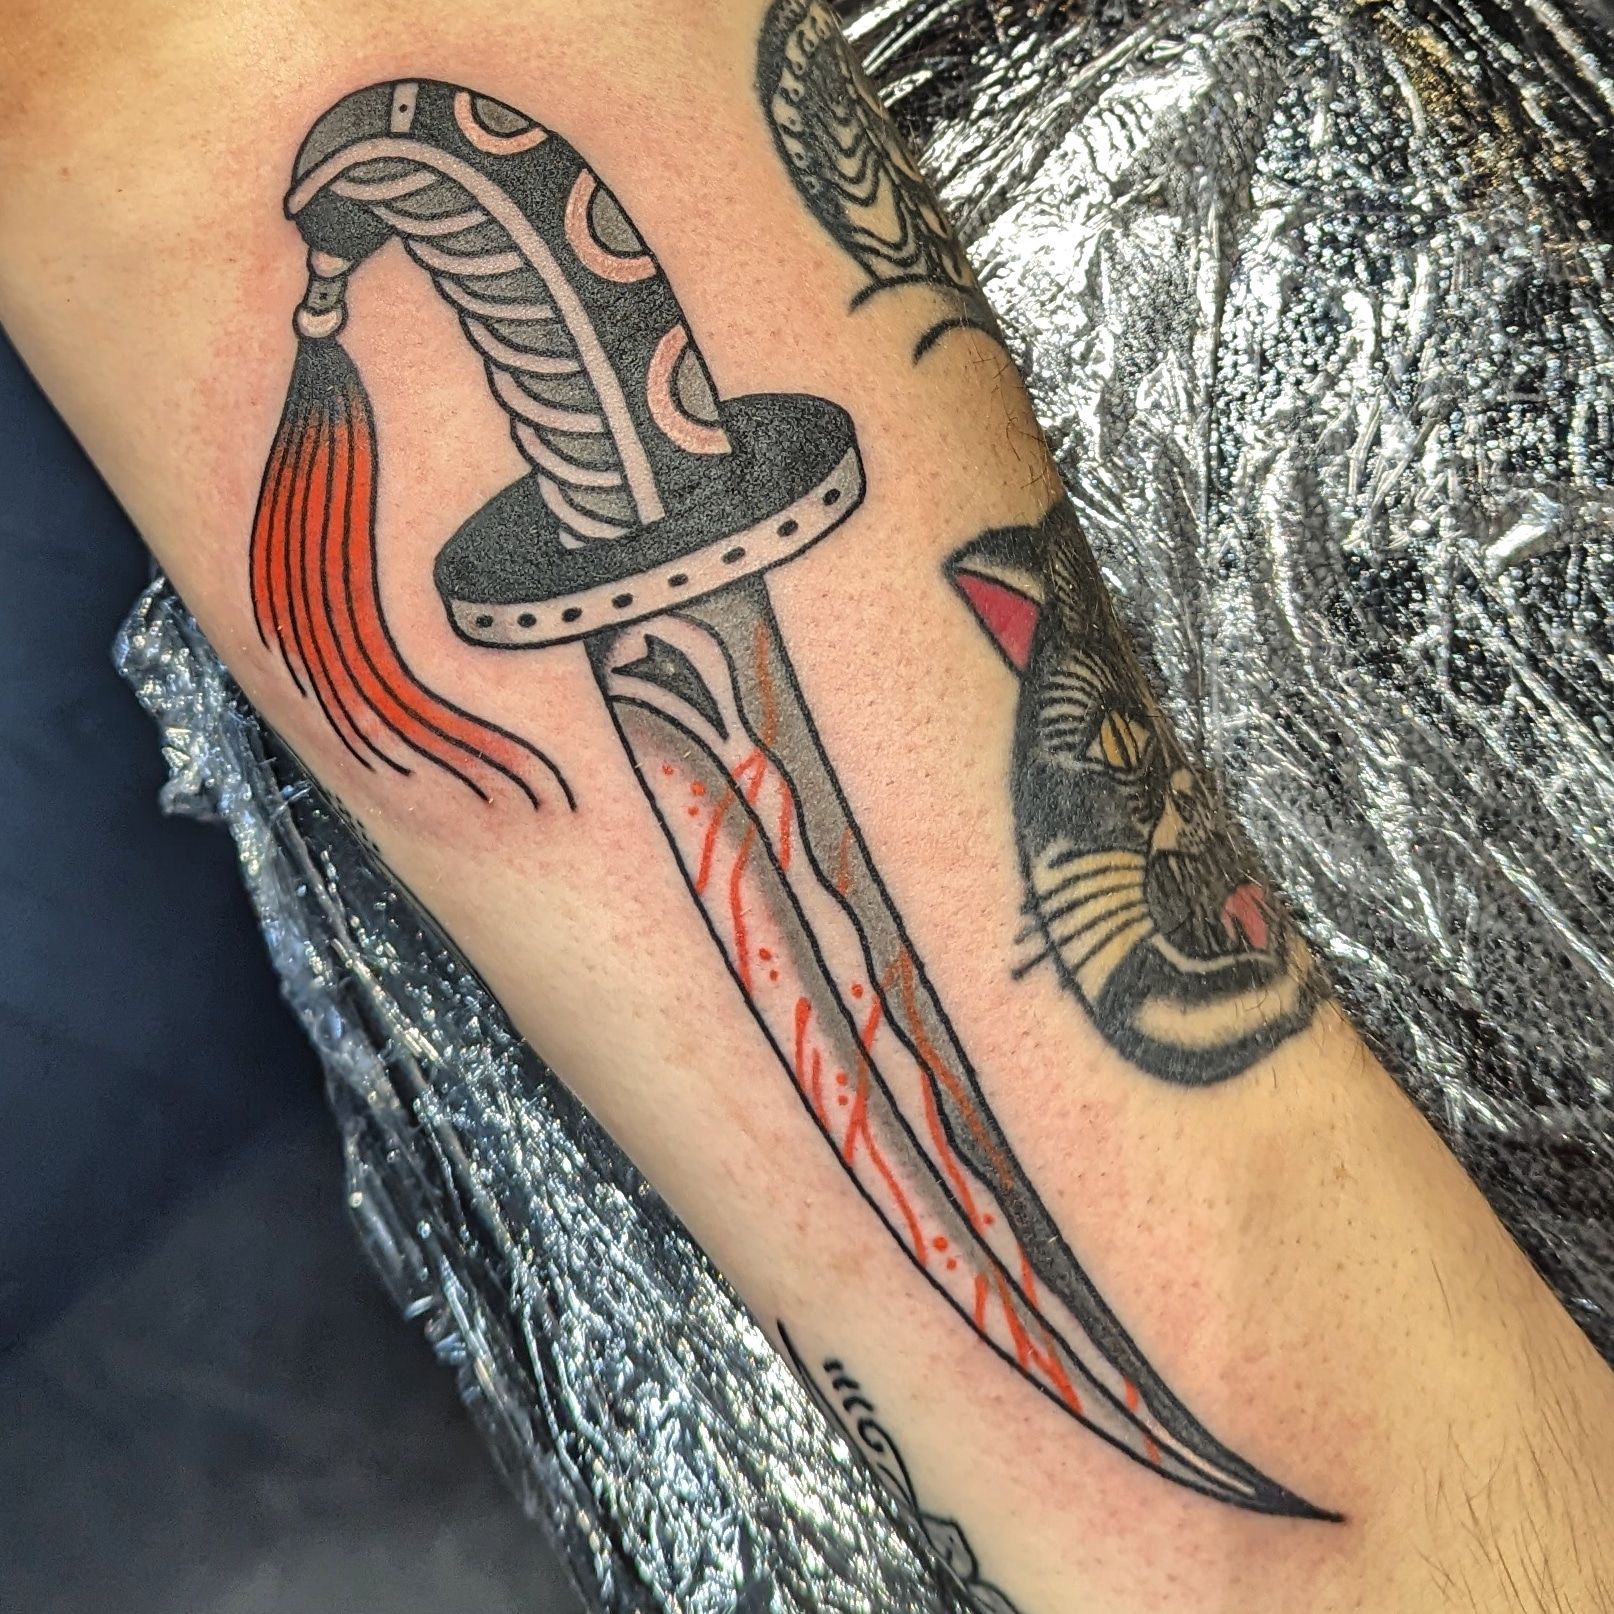 Bleach inspired tattoo, medieval/neotraditional style. : r/bleach